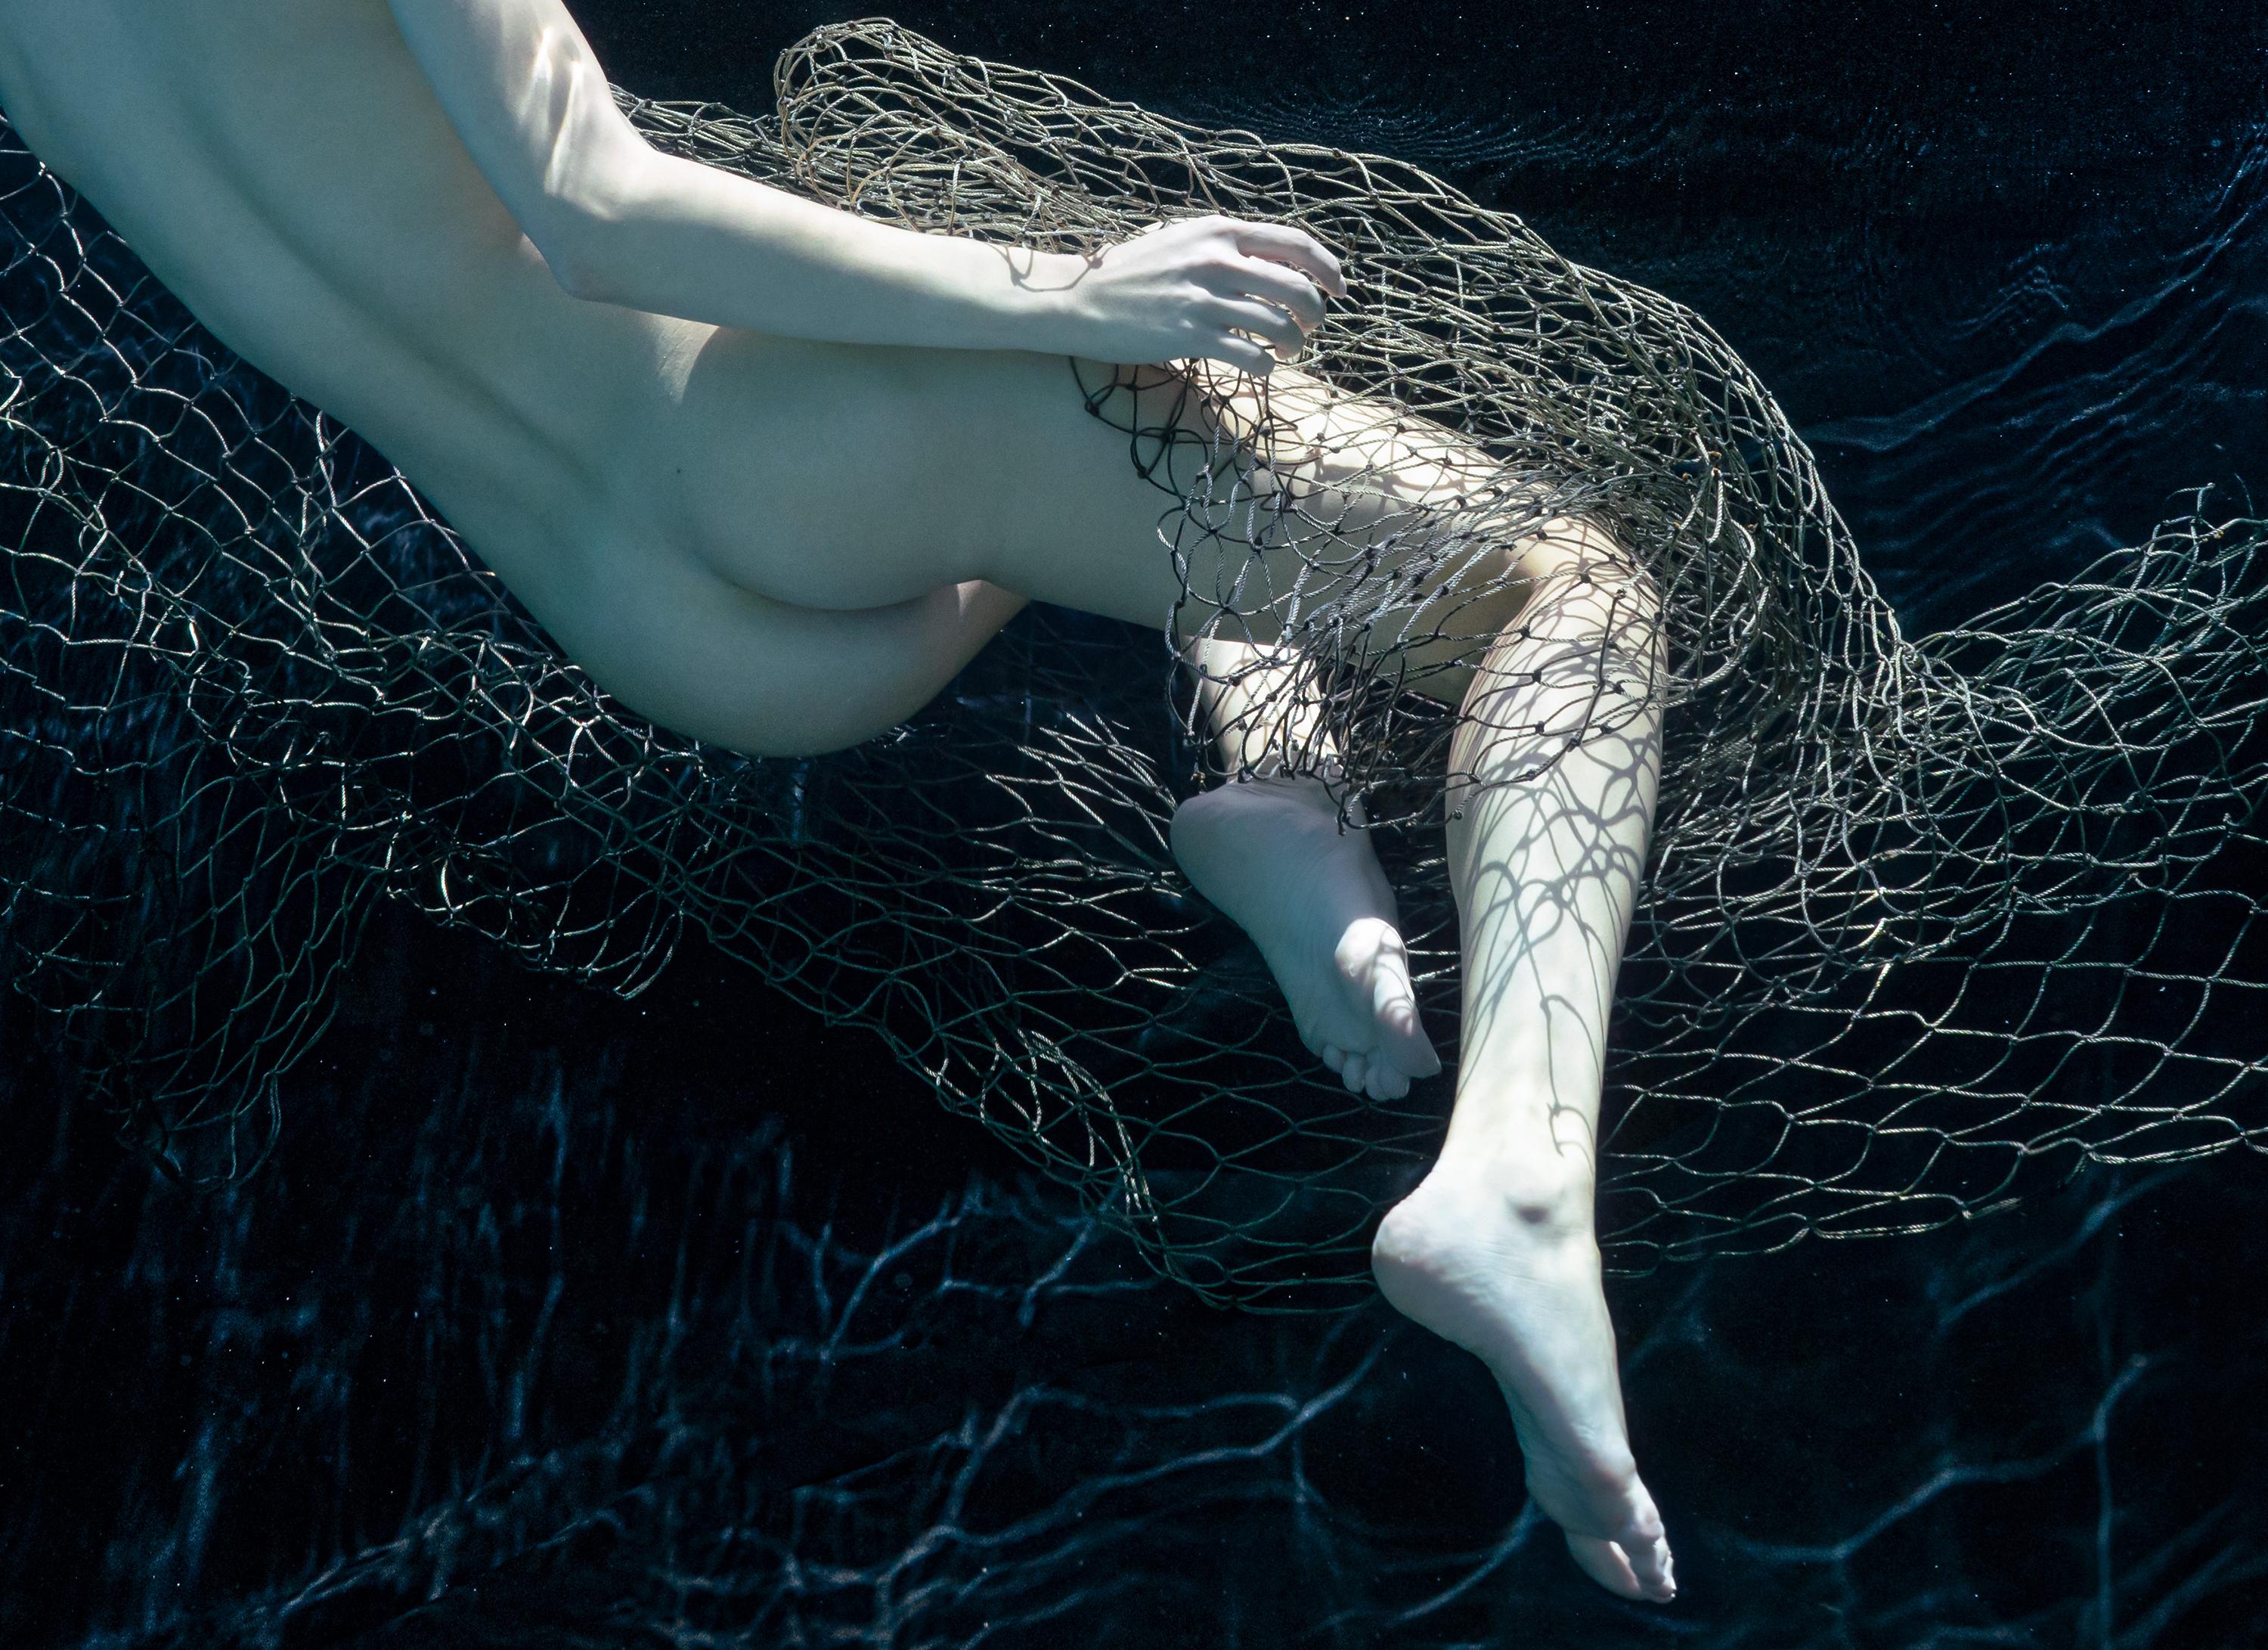 An underwater almost monochrome photograph of a naked young women wrapped in fishing net.

Original digital archival pigment print signed by the artist.
Limited edition of 24. 
Paper size: 36